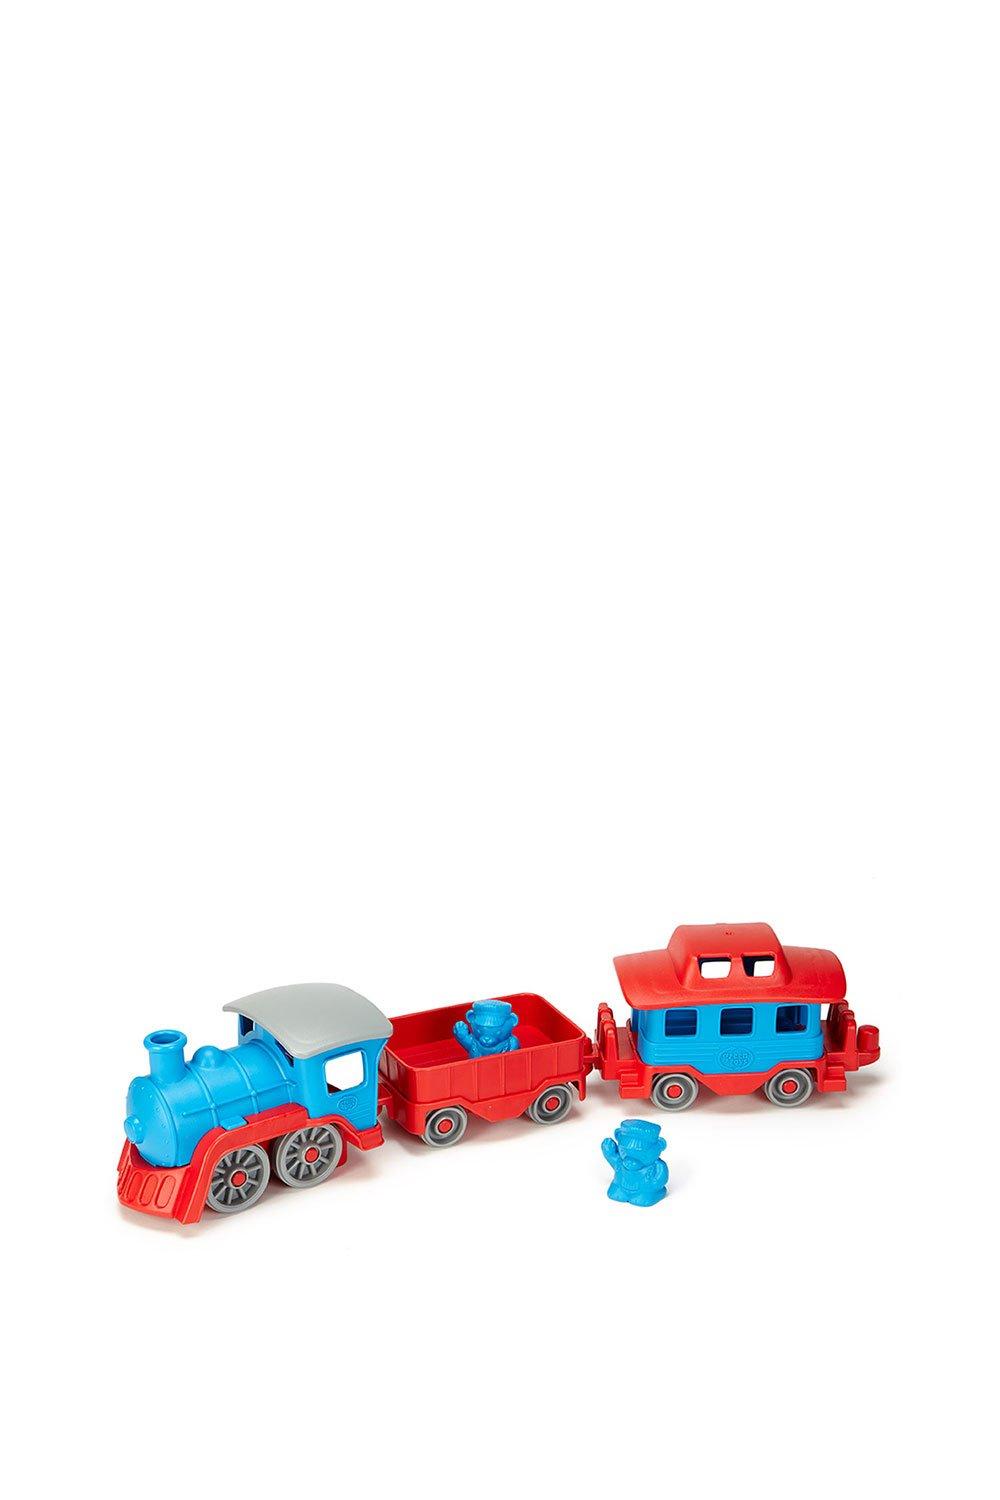 Green Toys Train Toy|blue